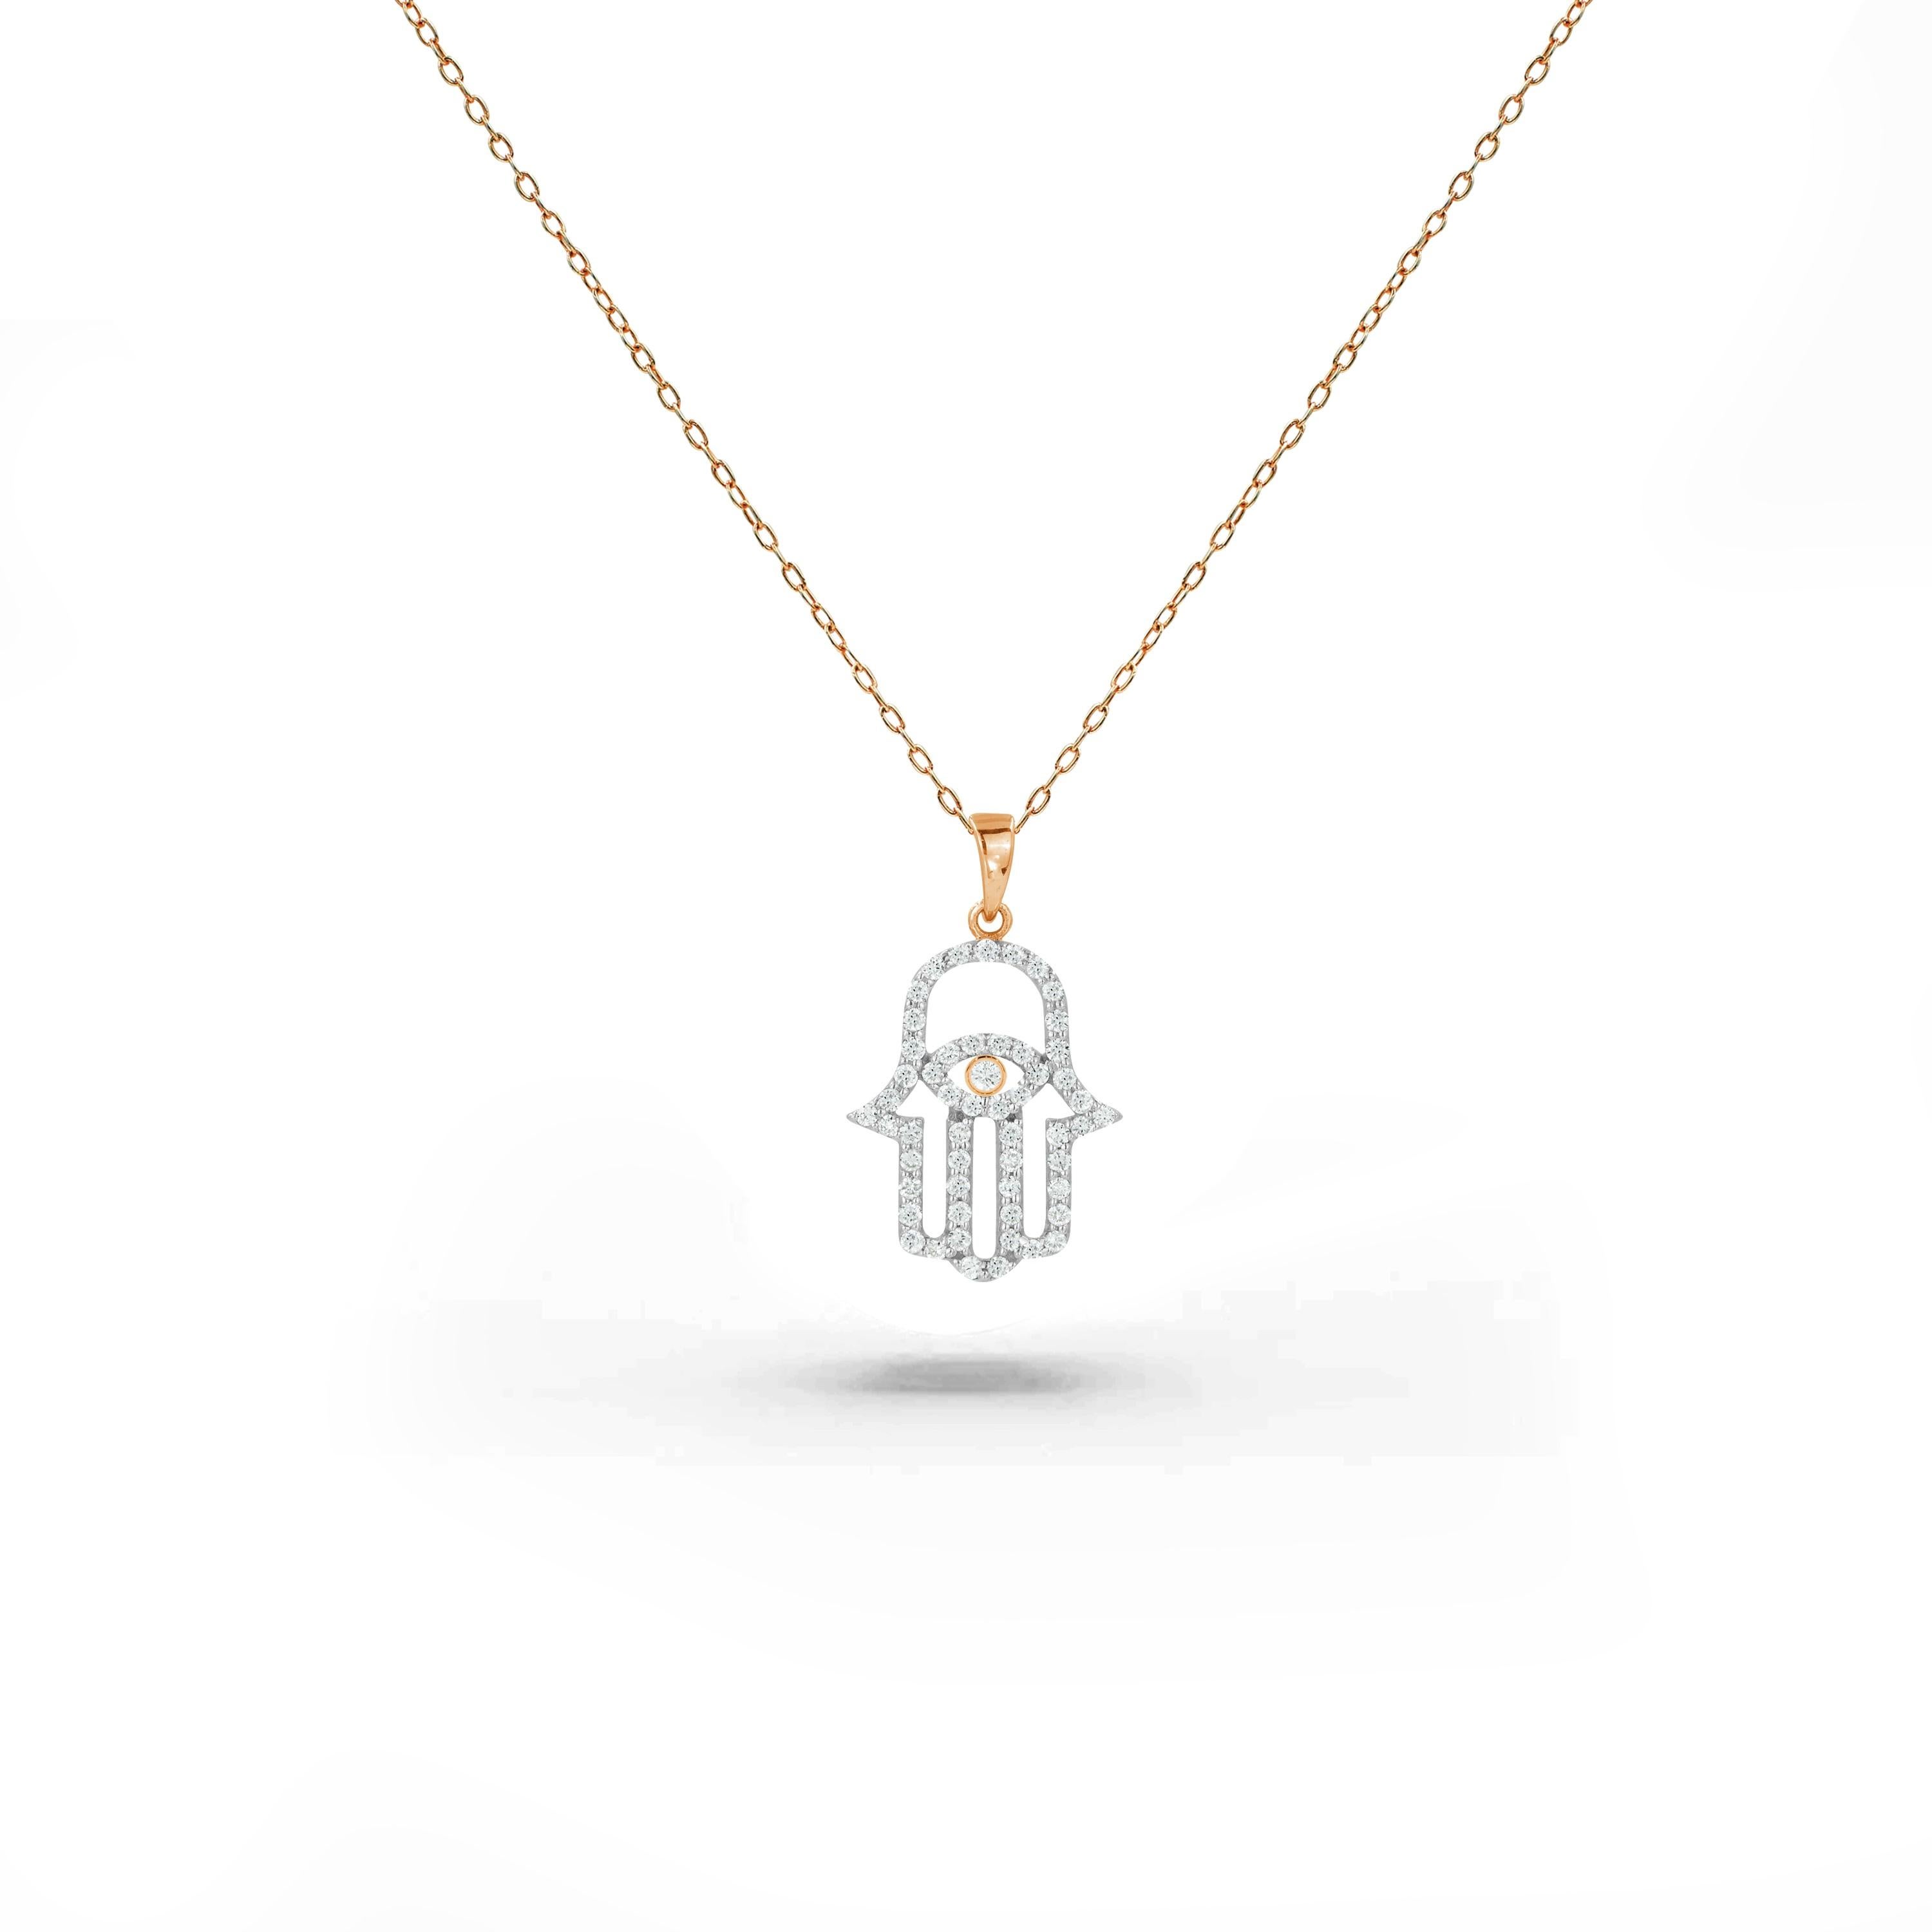 Beautiful little Hamsa Hand Pendant is made of 18k solid gold available in three colors, White Gold / Rose Gold / Yellow Gold.

Delicate Minimal Necklace is adorned with natural white round cut pave set diamonds. Perfect for wearing by itself for a